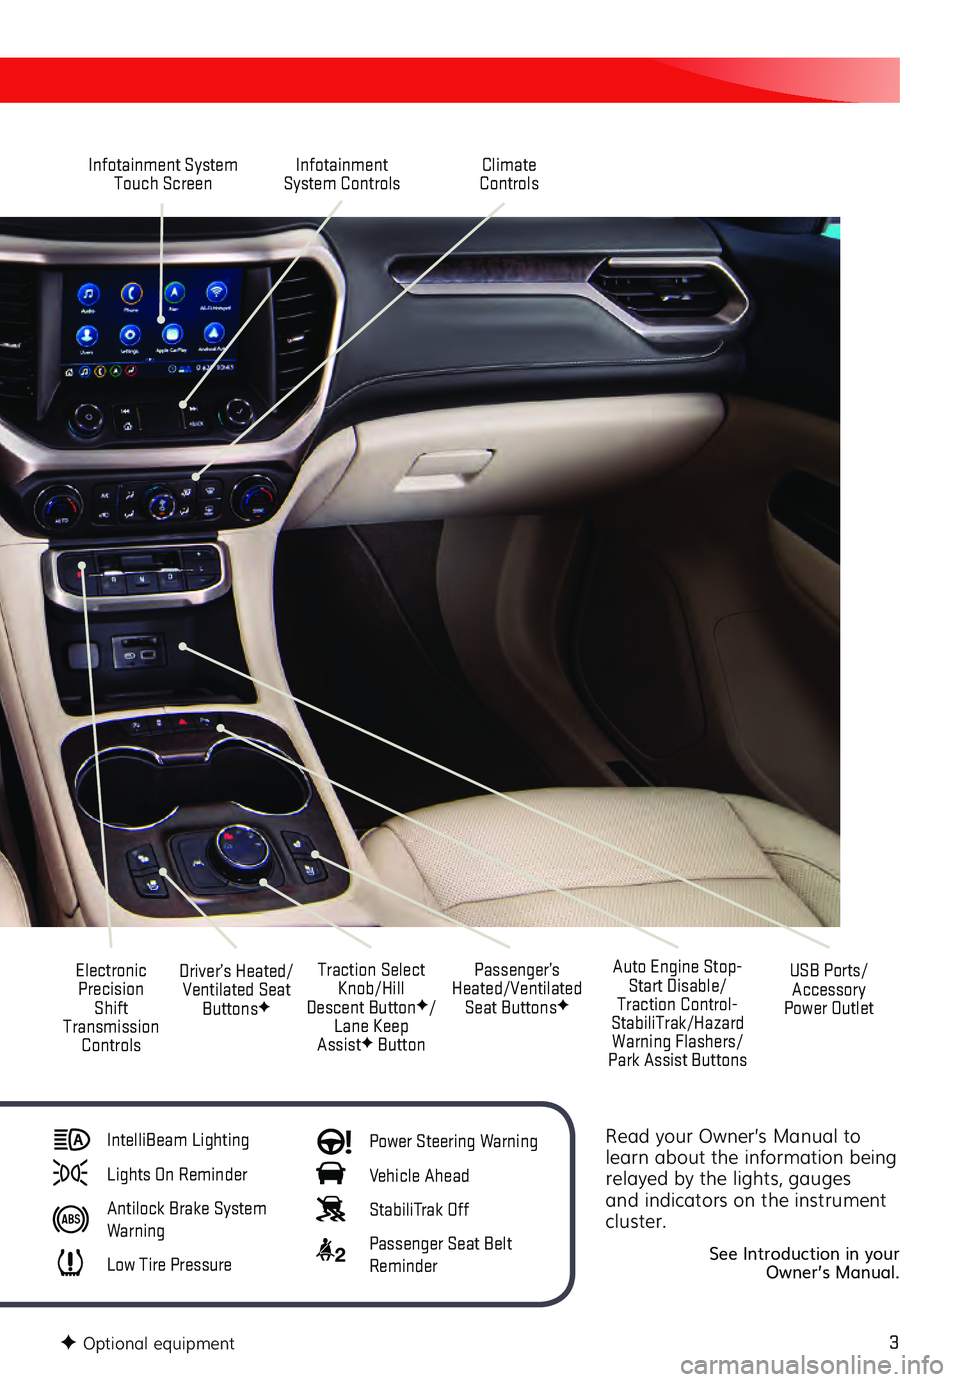 GMC ACADIA 2021  Get To Know Guide 3
Read your Owner’s Manual to 
learn about the information being 
relayed by the lights, gauges 
and indicators on the instrument 
cluster.
See Introduction in your  
Owner’s Manual.
Infotainment 